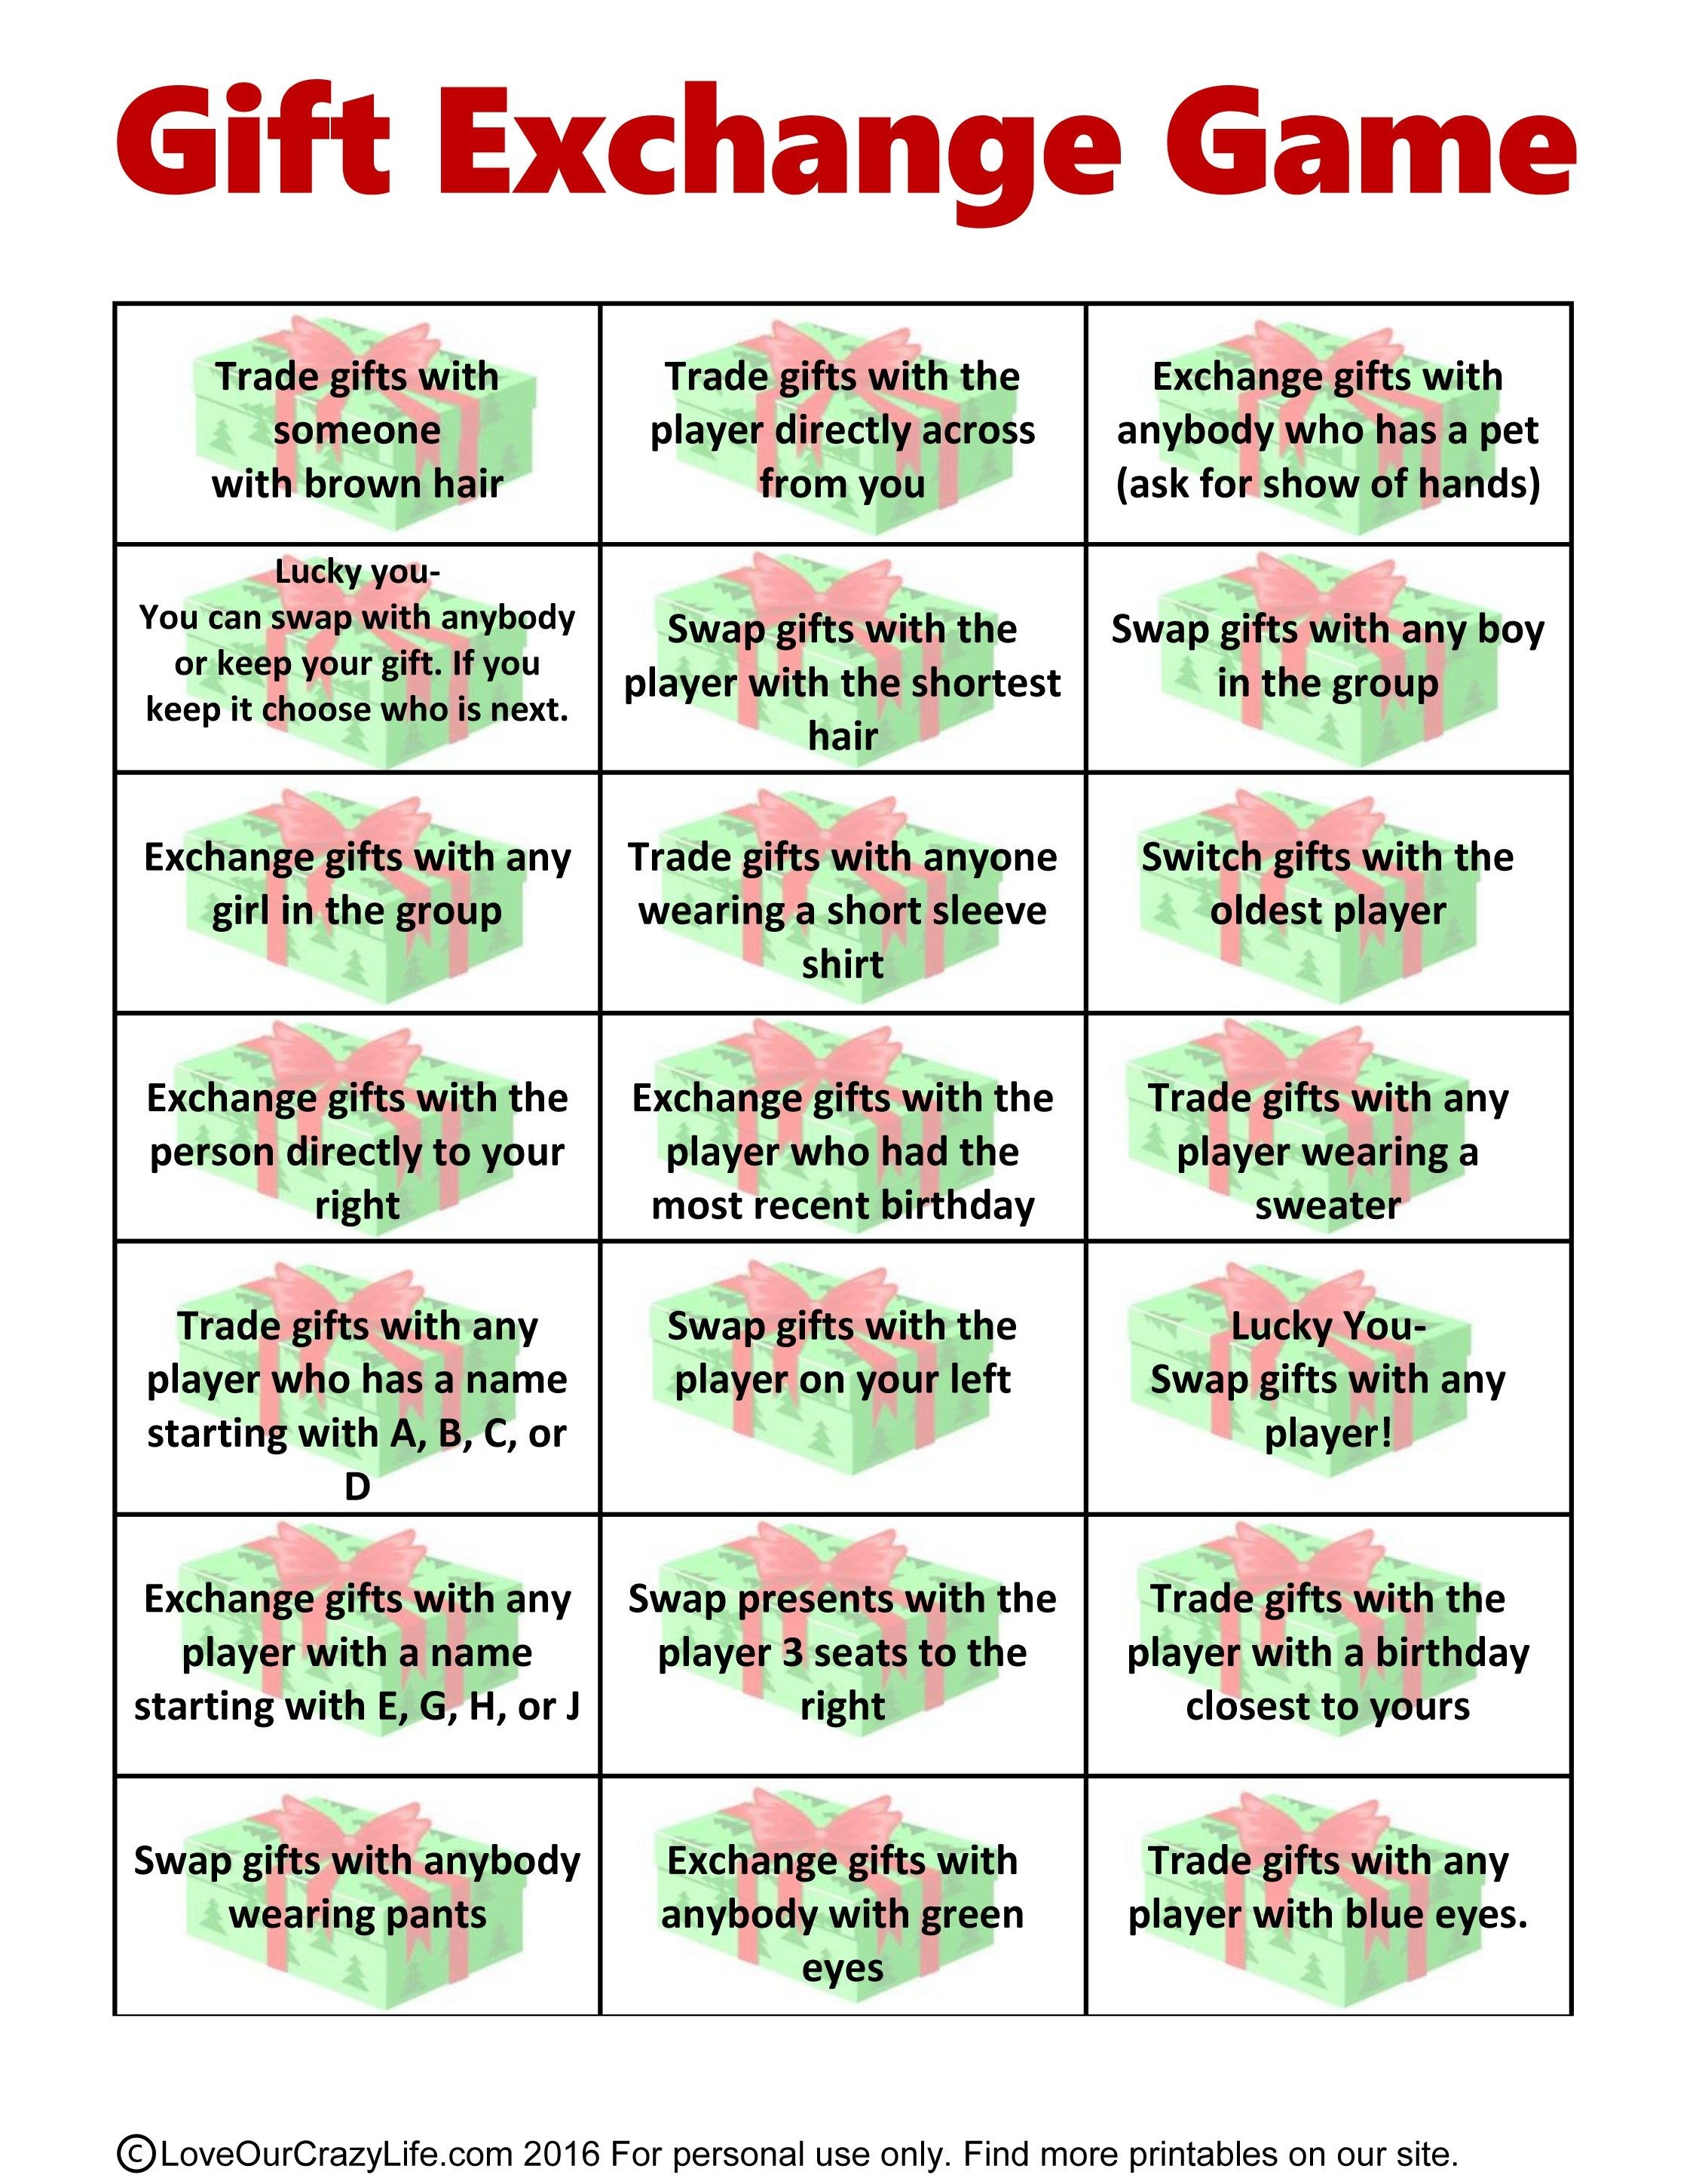 Free Gift Exchange Game Printable | Holiday Games | Christmas Games - Holiday Office Party Games Free Printable